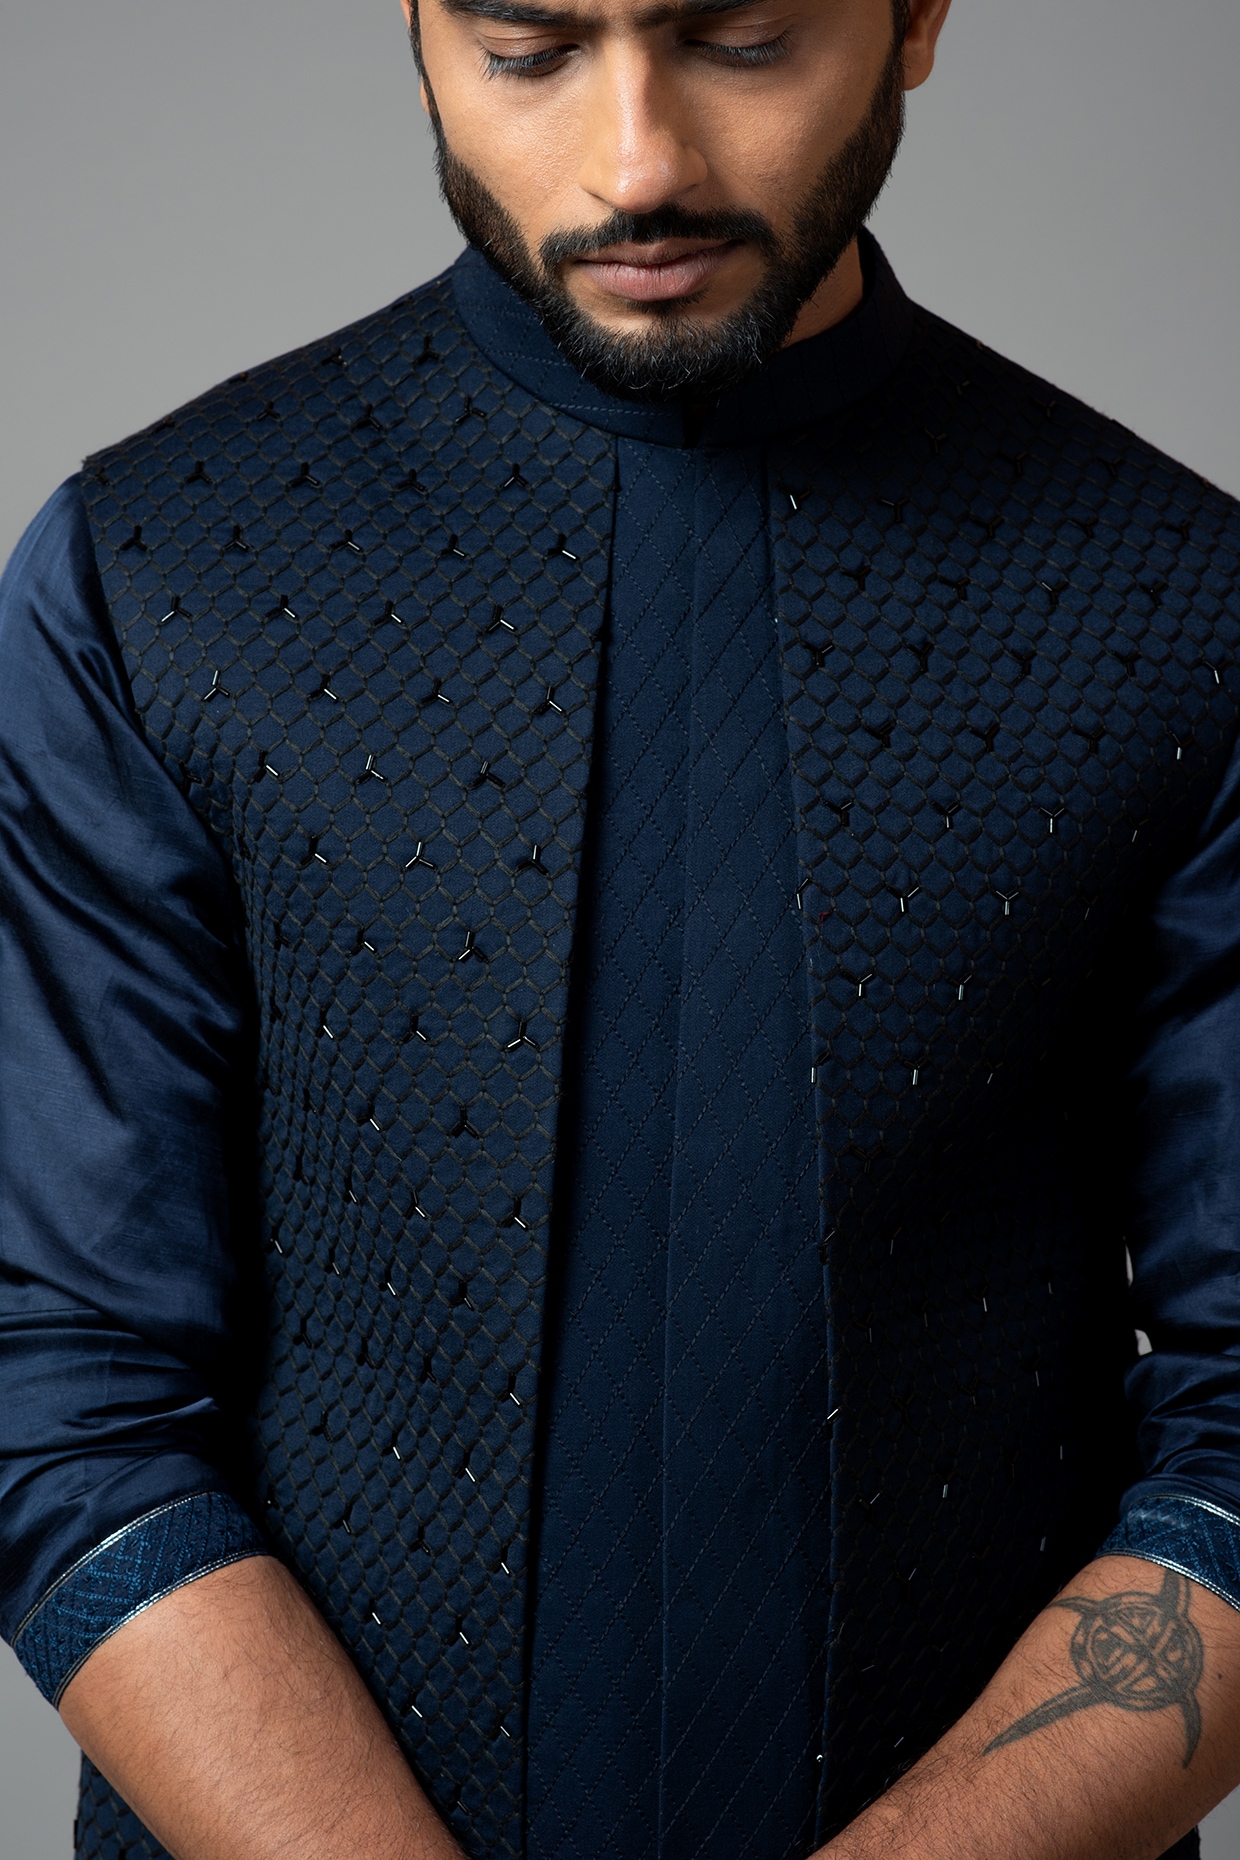 Best Nehru Jackets Under 3000: 6 Best Nehru Jackets Under 3000 in India for  a Dapper Desi Look - The Economic Times